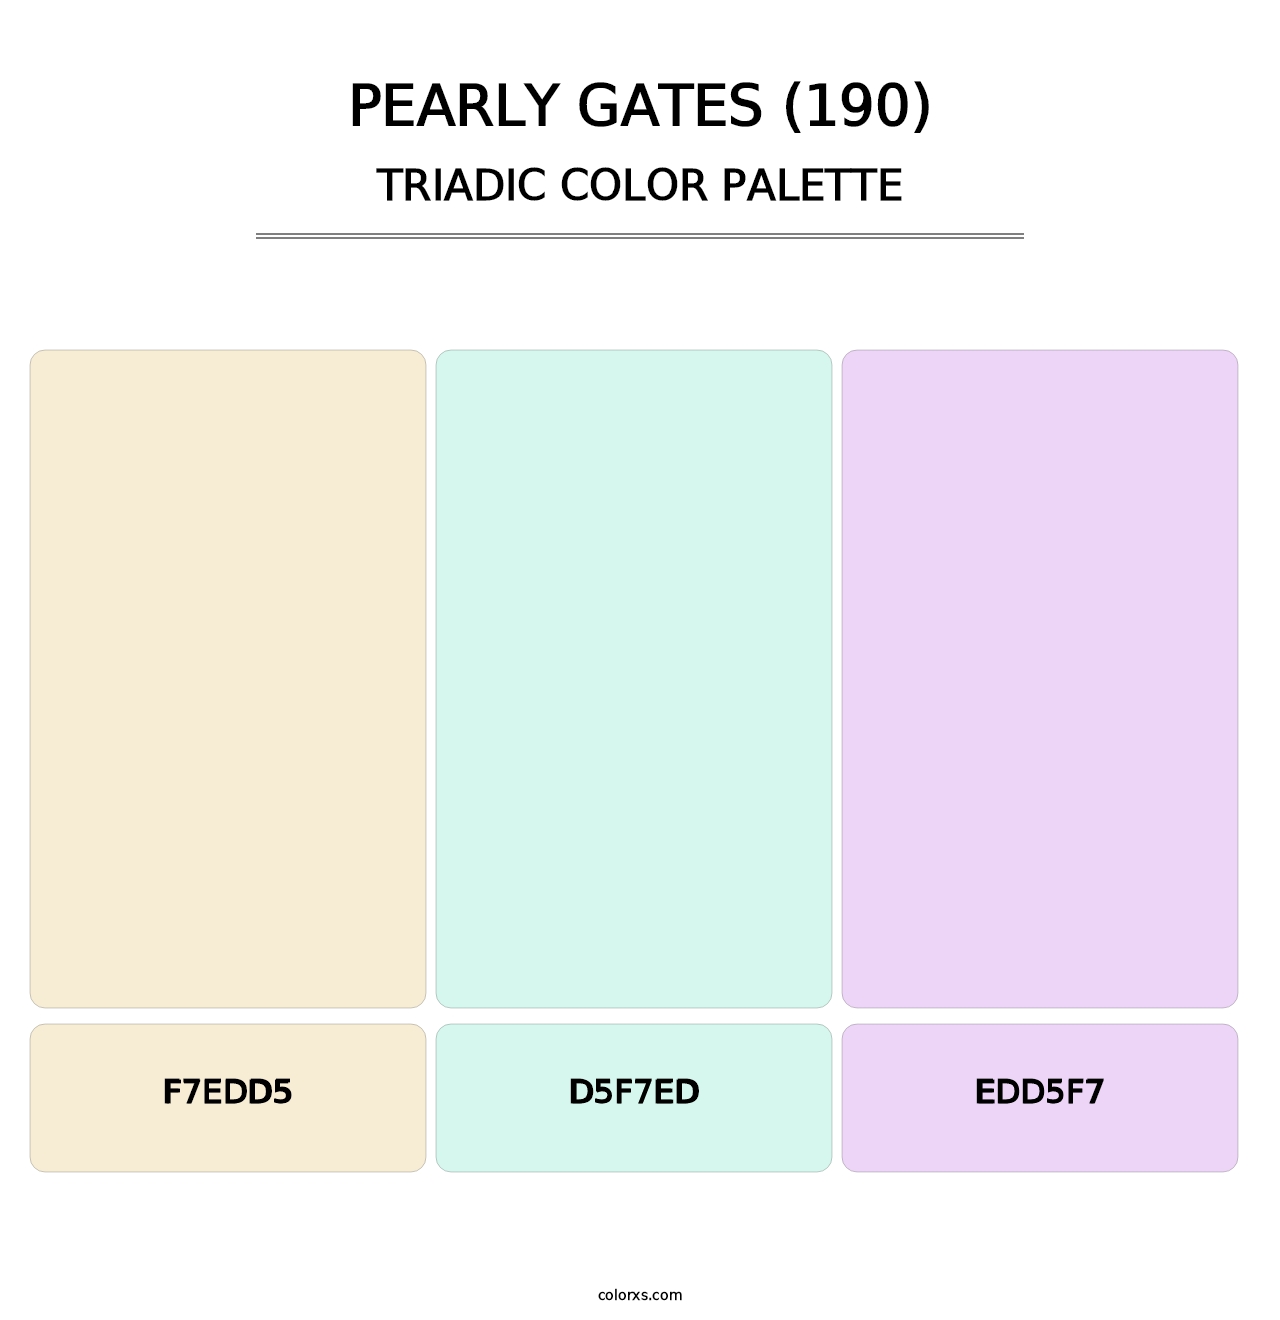 Pearly Gates (190) - Triadic Color Palette